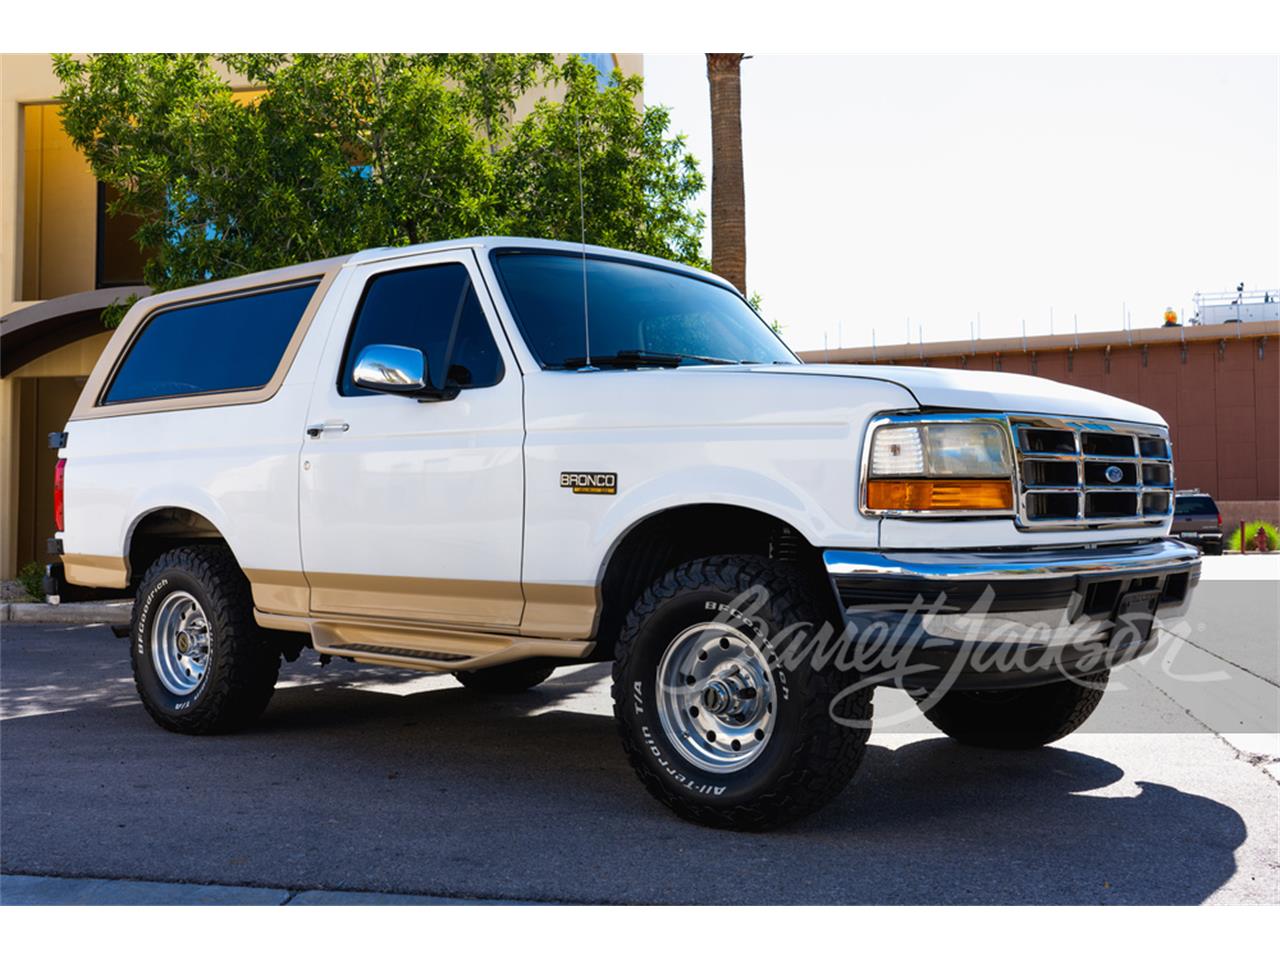 For Sale at Auction: 1995 Ford Bronco in Scottsdale, Arizona for sale in Scottsdale, AZ